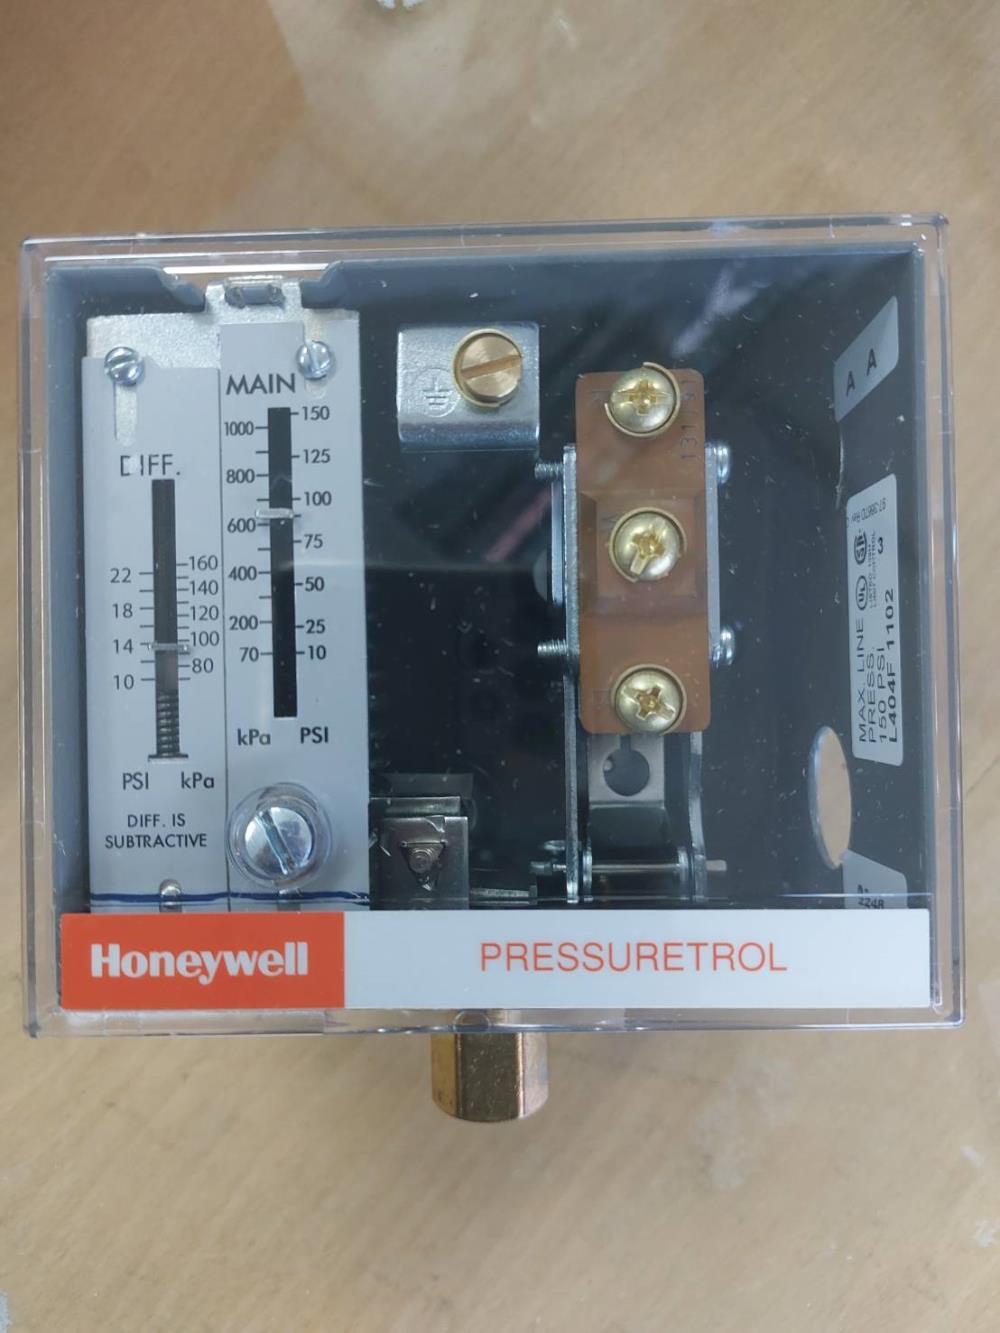 Pressure Switch "Honeywell" L404F 1102,Pressure Switch "Honeywell" L404F 1102,Pressure Switch "Honeywell" L404F 1102,Instruments and Controls/Switches